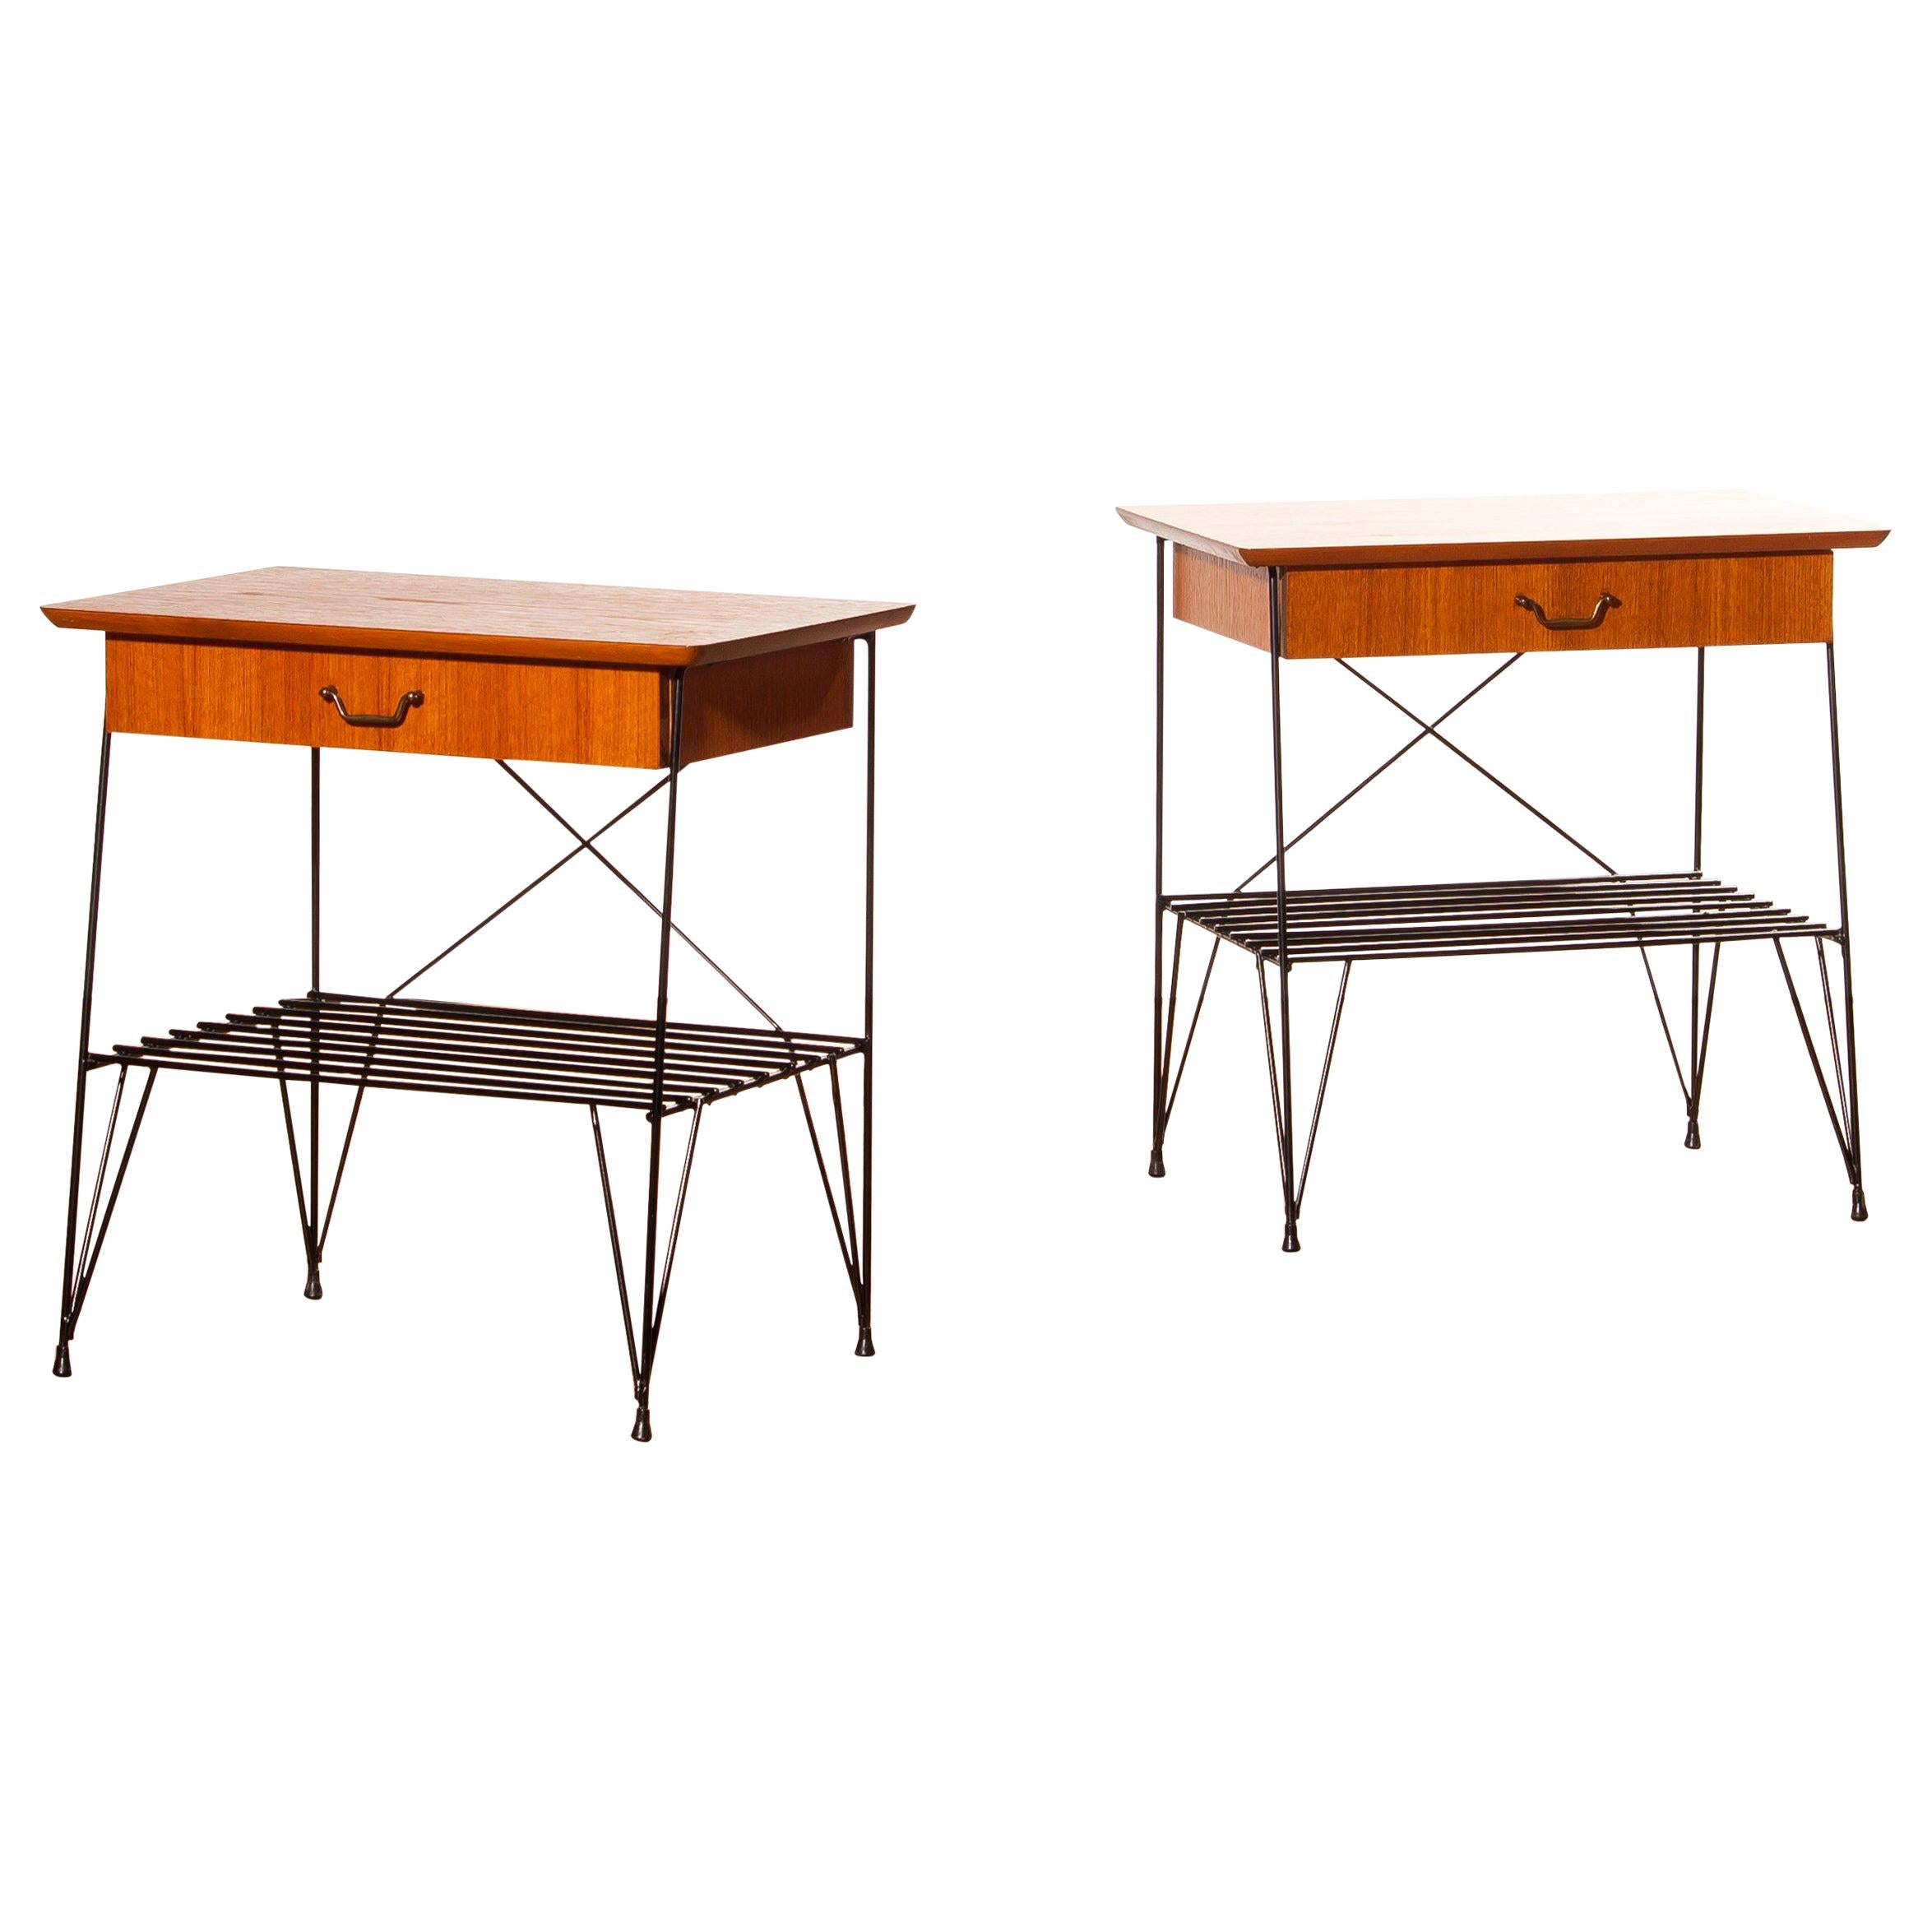 Exclusive nightstands or side tables in the famous Gullberg style.
The set is in perfect condition.
Made of black metal in combination with teak.
Period: 1950-1959, Sweden.
The dimensions are H 53 cm, W 52 cm, D 31 cm.